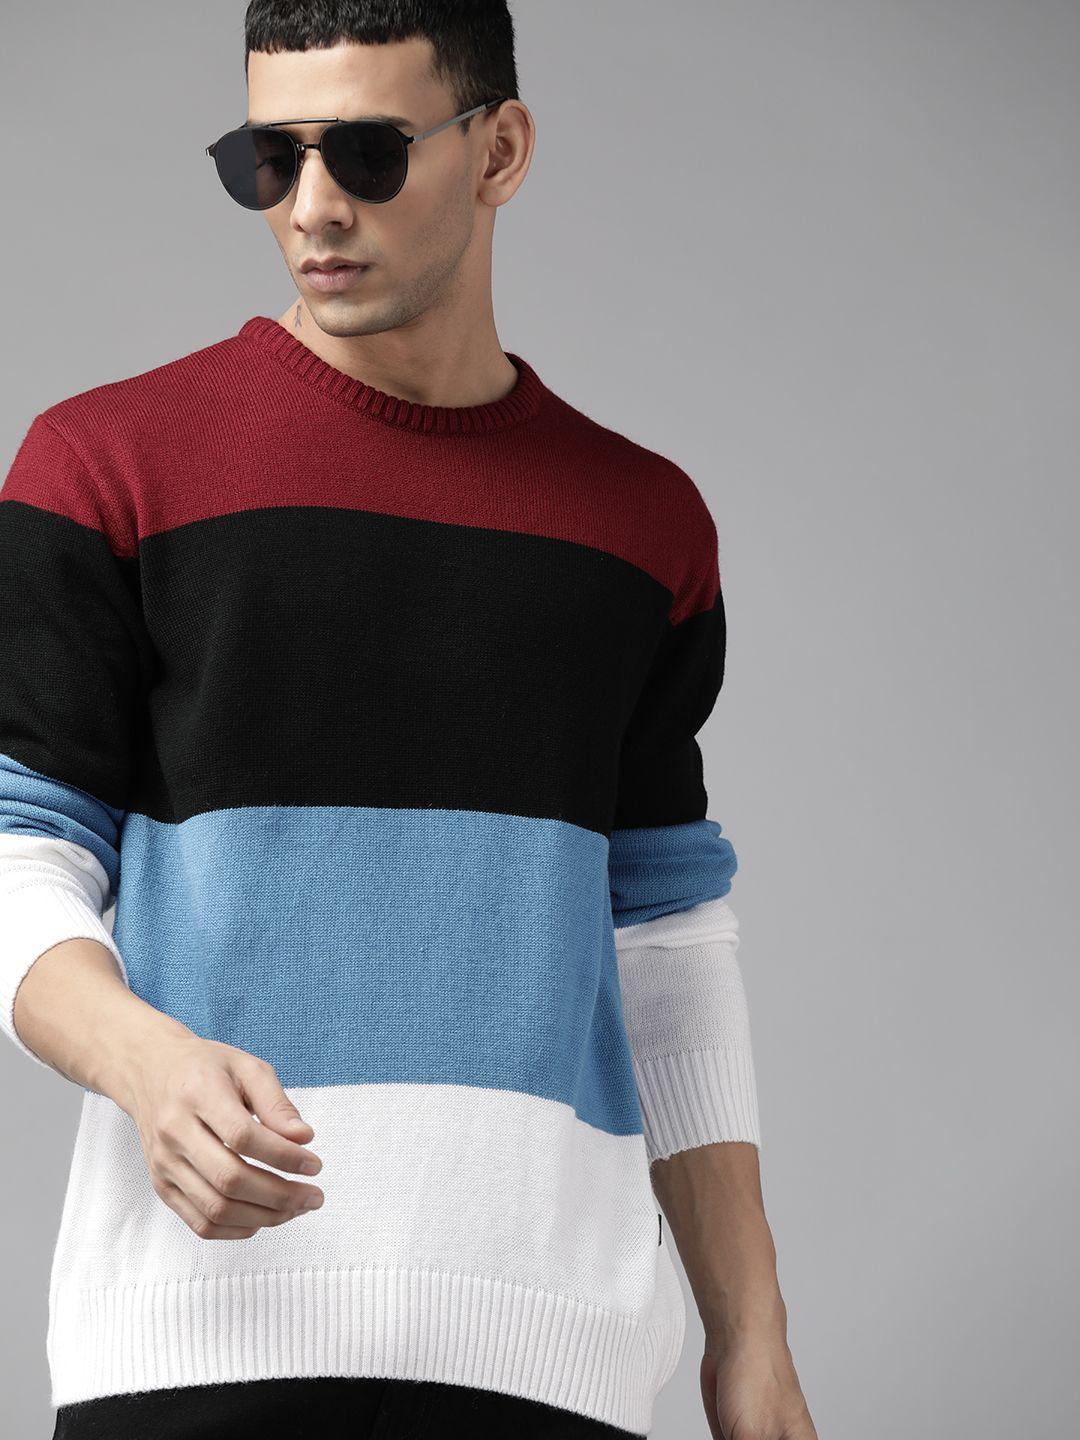 the roadster lifestyle co.  men maroon & blue acrylic colourblocked pullover